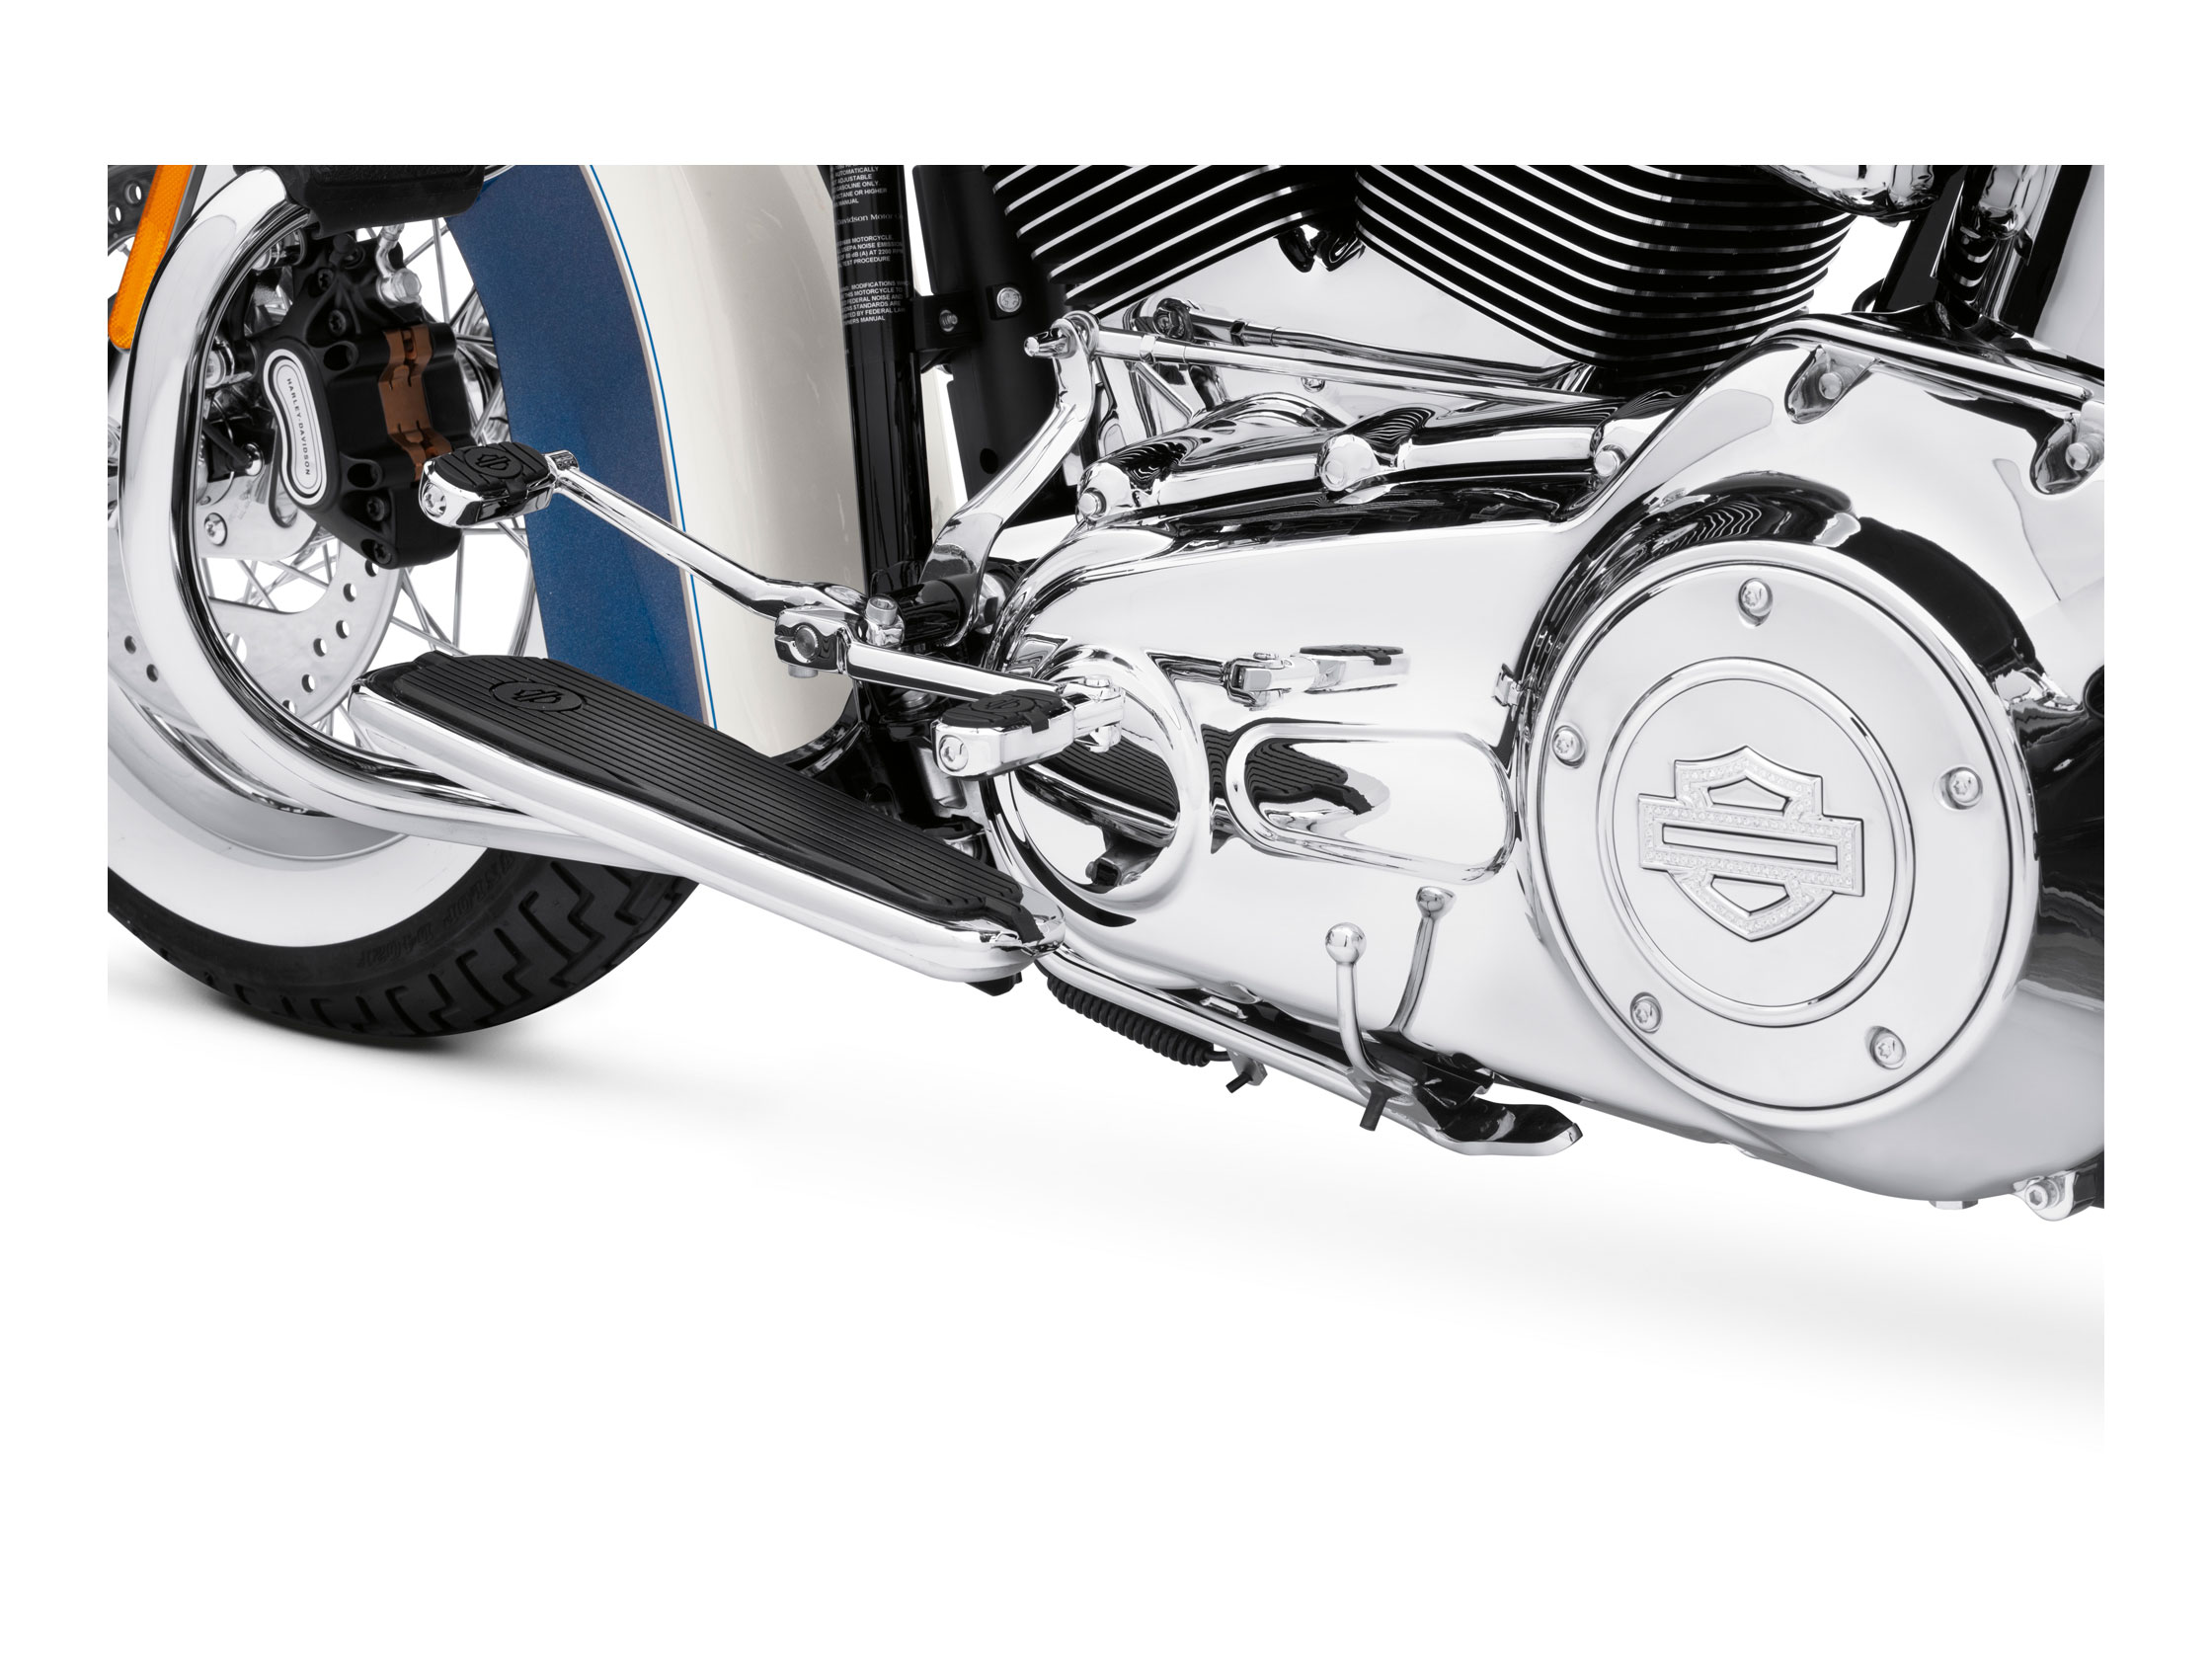 ERGO JIFFY STAND 50000091 / Jiffy Stands / Softail / Parts & Accessories /  - House-of-Flames Harley-Davidson